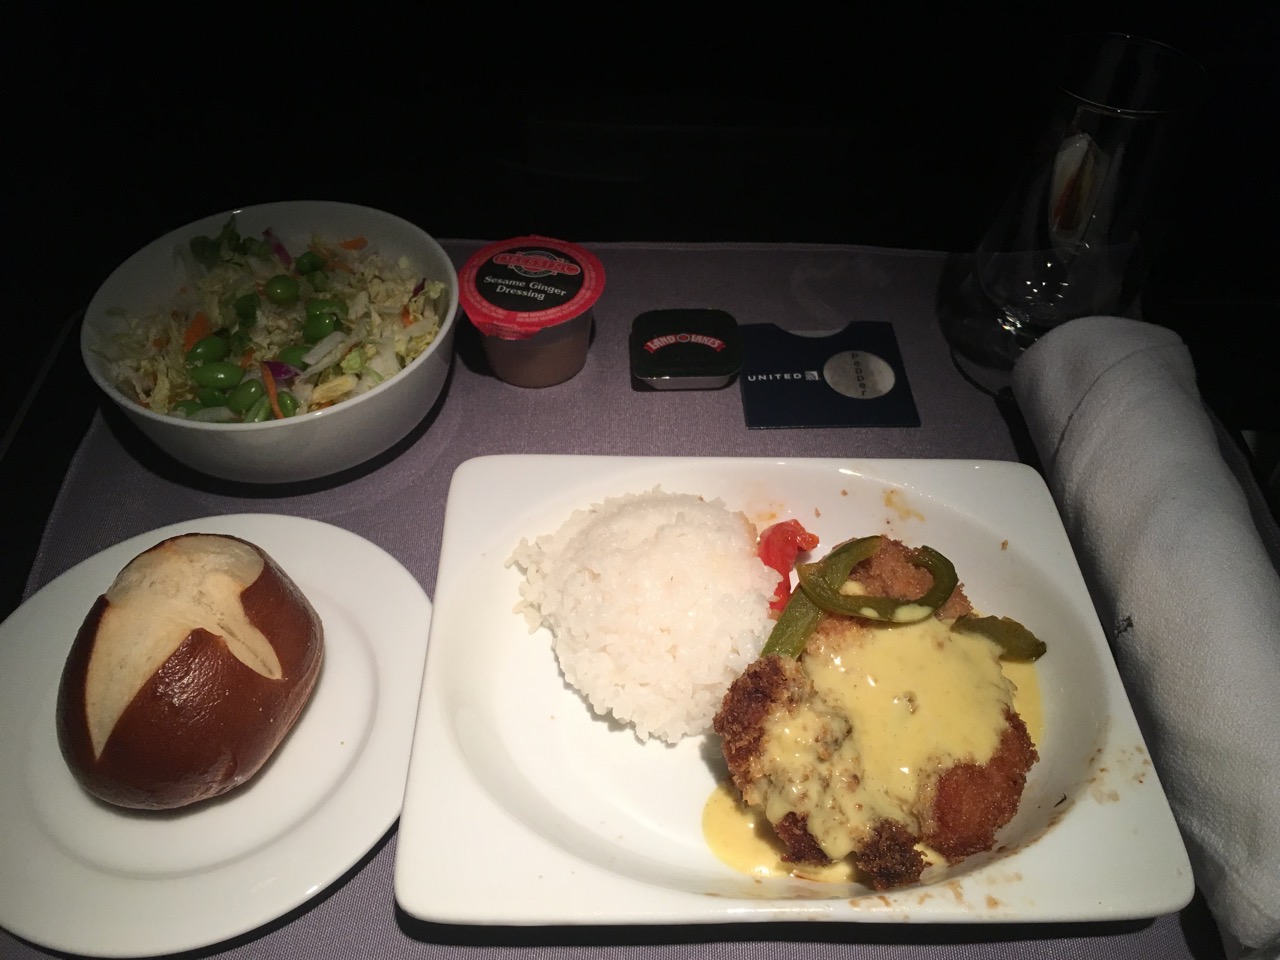 United Airlines Domestic First Class Meal